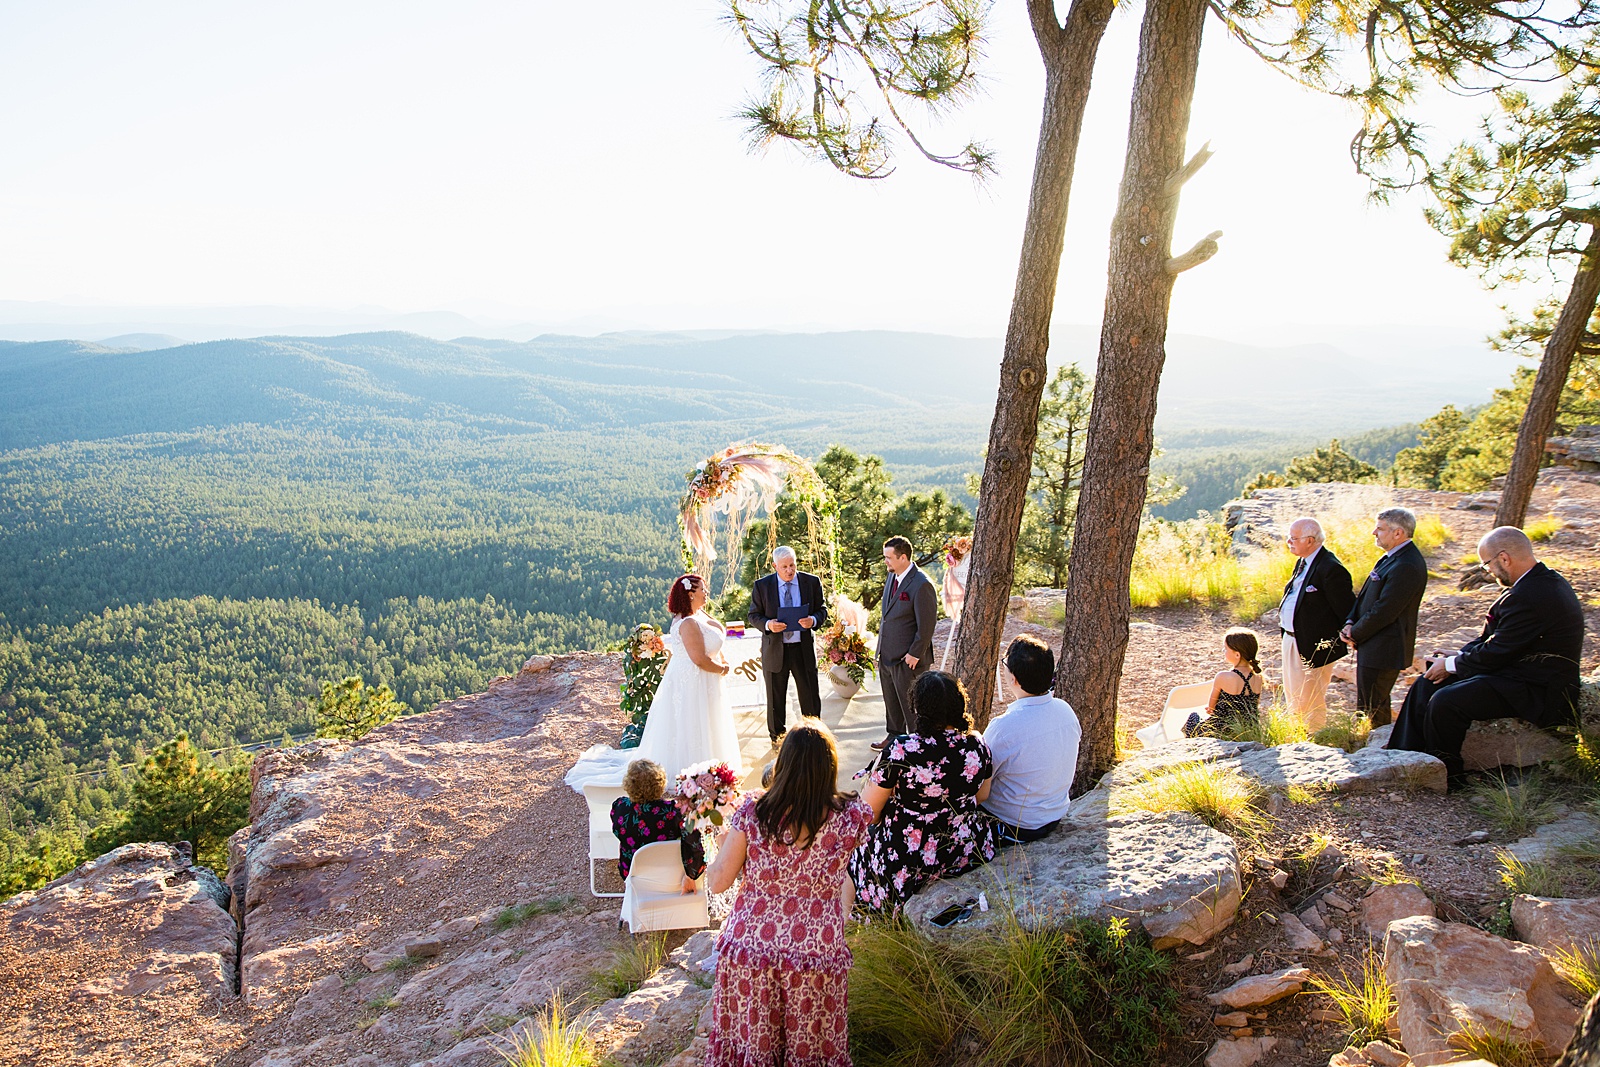 Family and guests during Mogollon Rim wedding ceremony by Arizona elopement photographer PMA Photography.